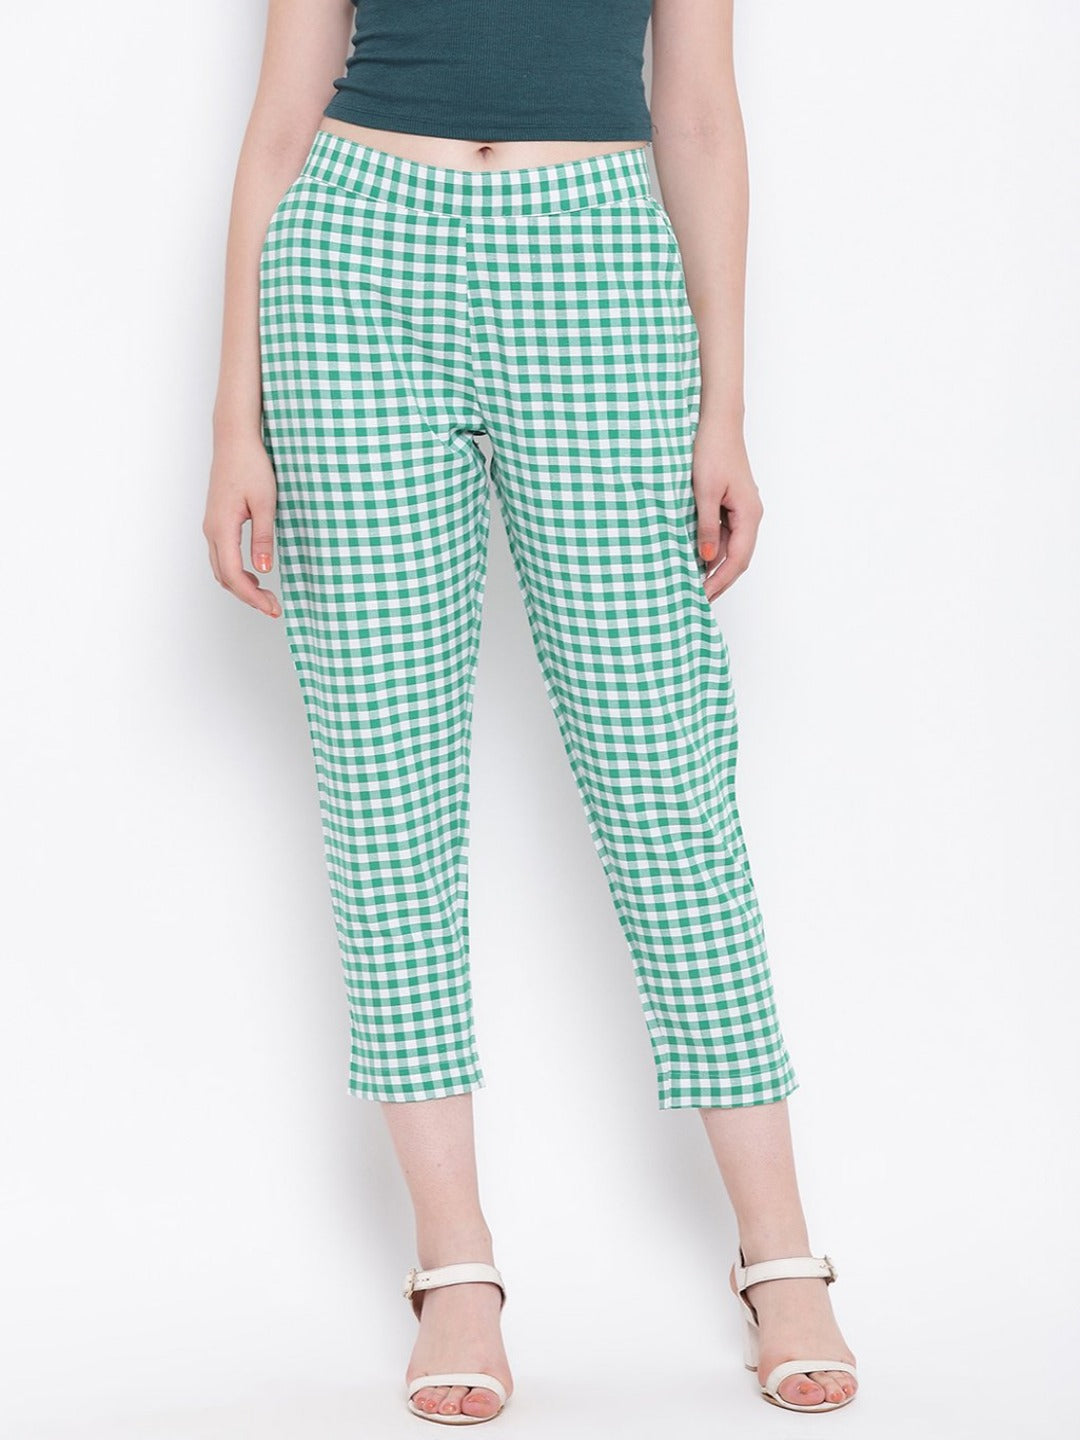 Handloom cotton green and white check pants-Bottoms-Fabnest